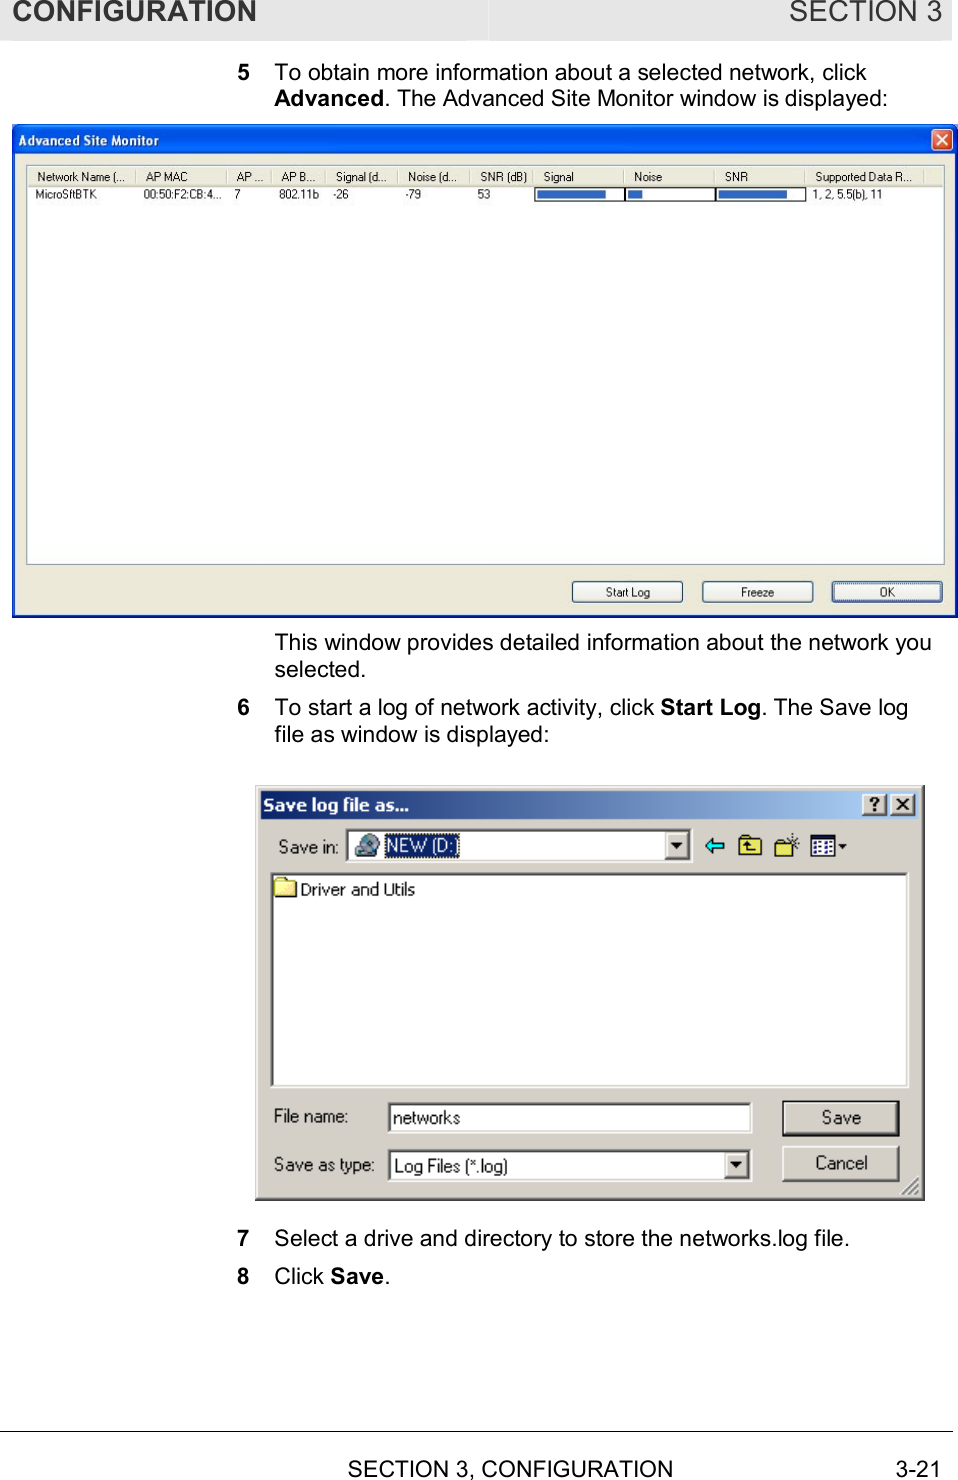 CONFIGURATION SECTION 3   SECTION 3, CONFIGURATION  3-21 5  To obtain more information about a selected network, click Advanced. The Advanced Site Monitor window is displayed:   This window provides detailed information about the network you selected. 6  To start a log of network activity, click Start Log. The Save log file as window is displayed:  7  Select a drive and directory to store the networks.log file. 8  Click Save. 